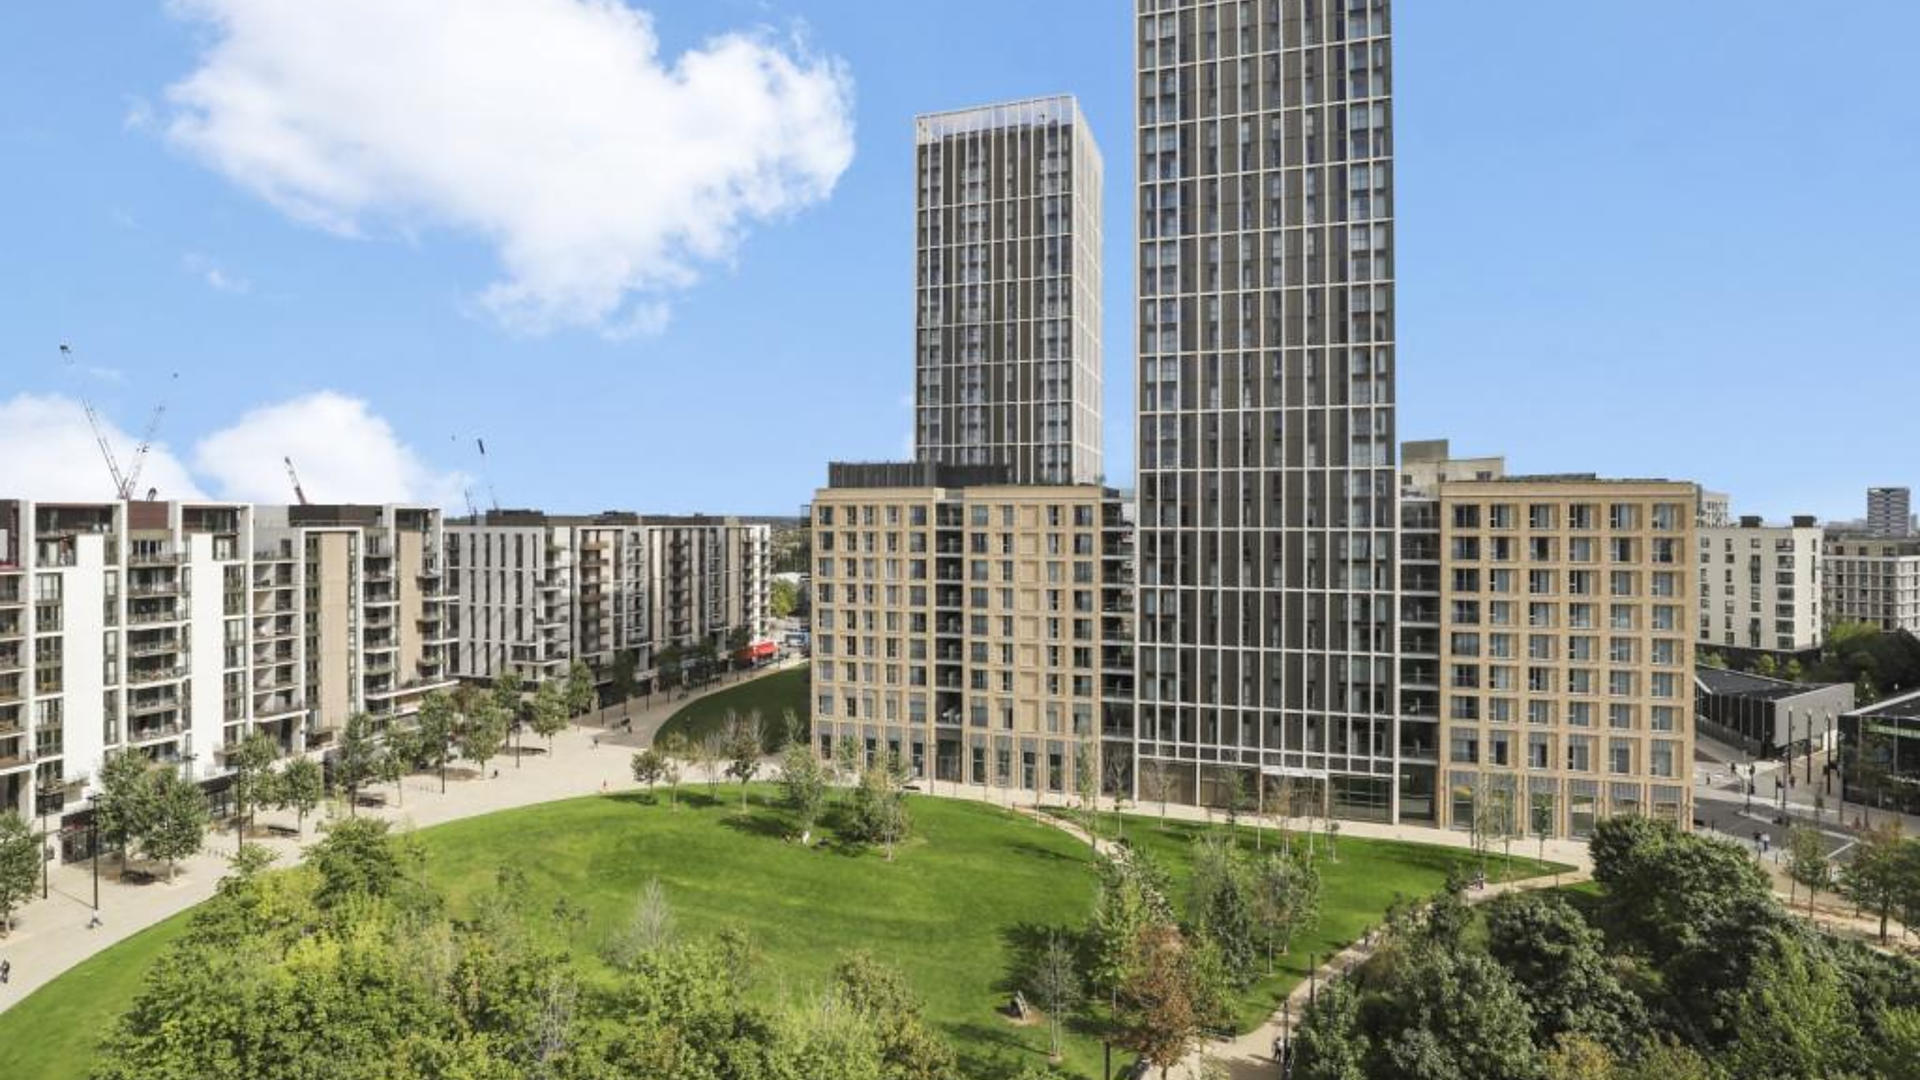 Apartments to Rent by Get Living at East Village, Newham, E20, development panoramic